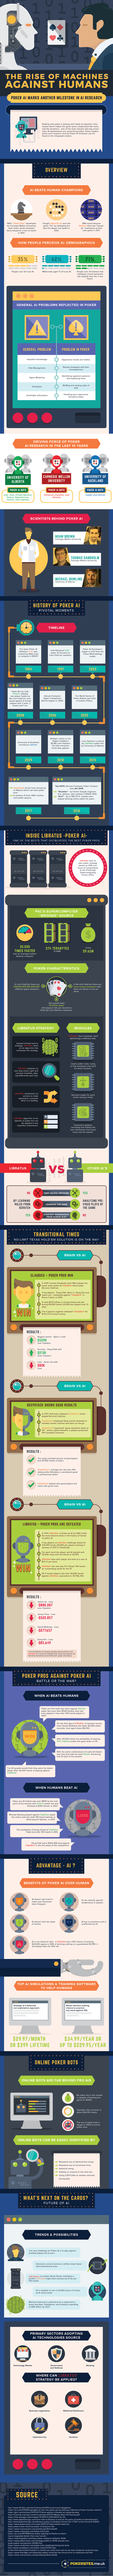 Poker & AI. Infographic (Updated )